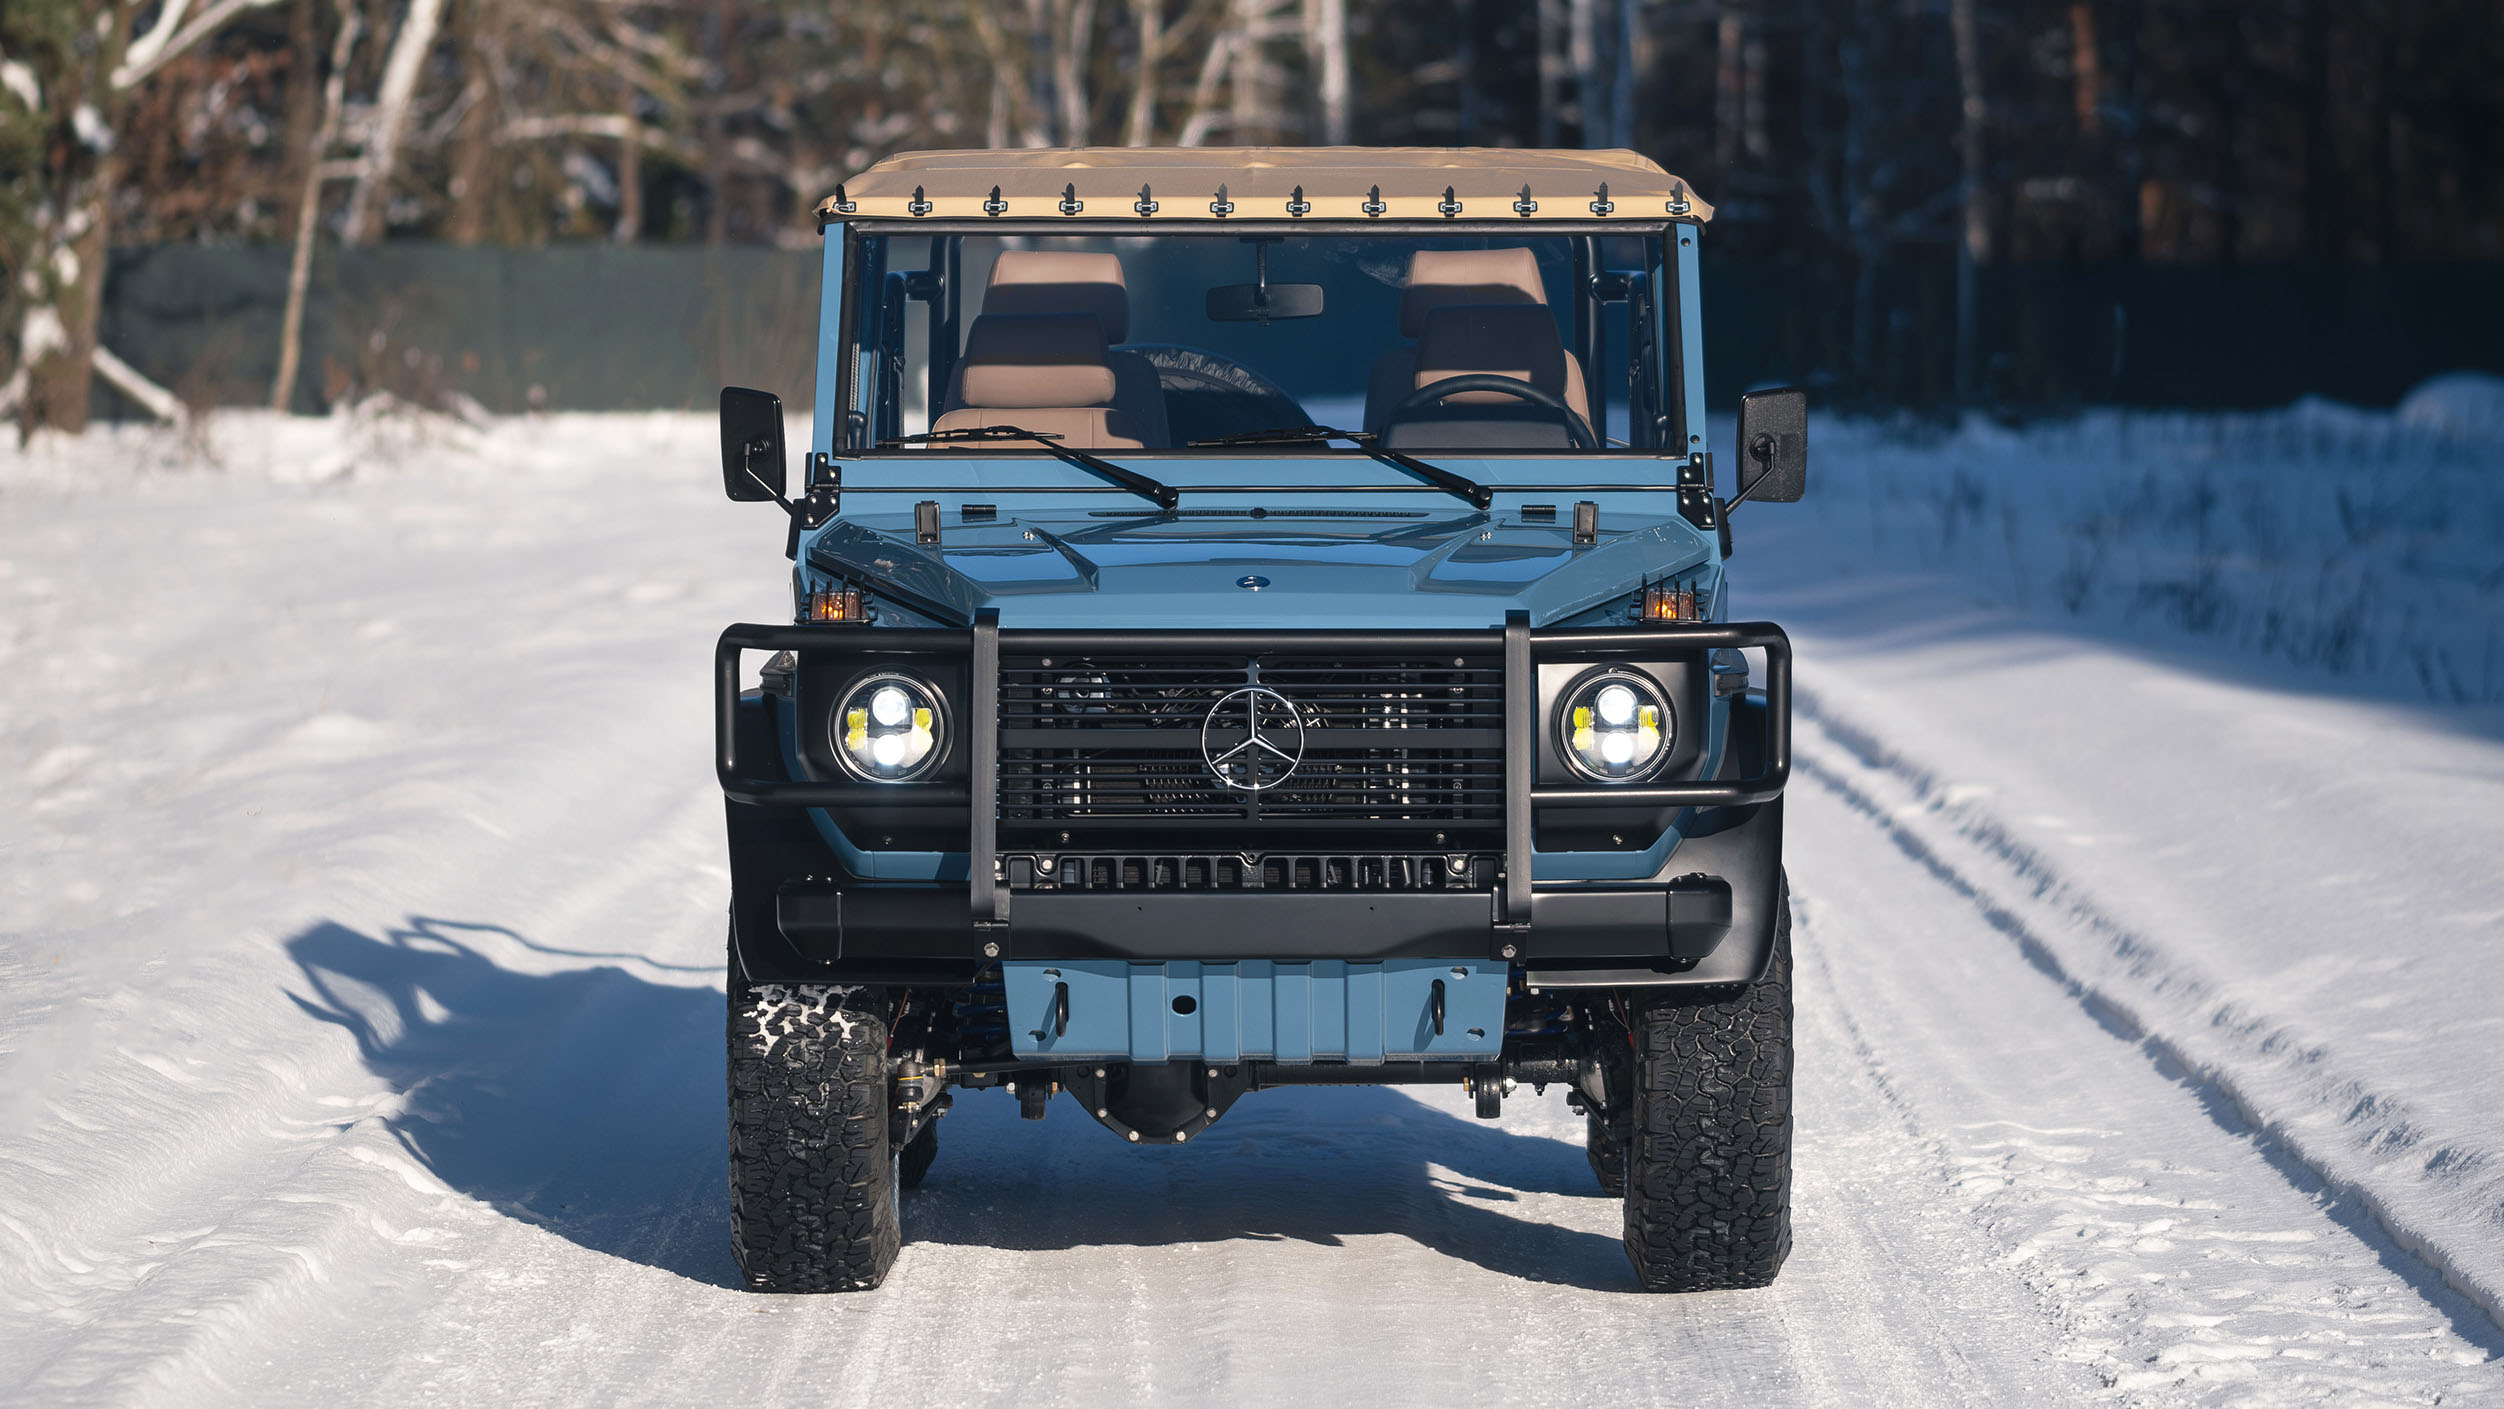 don’t fancy a new g-wagen? the emc 250gd wolf could be your calling